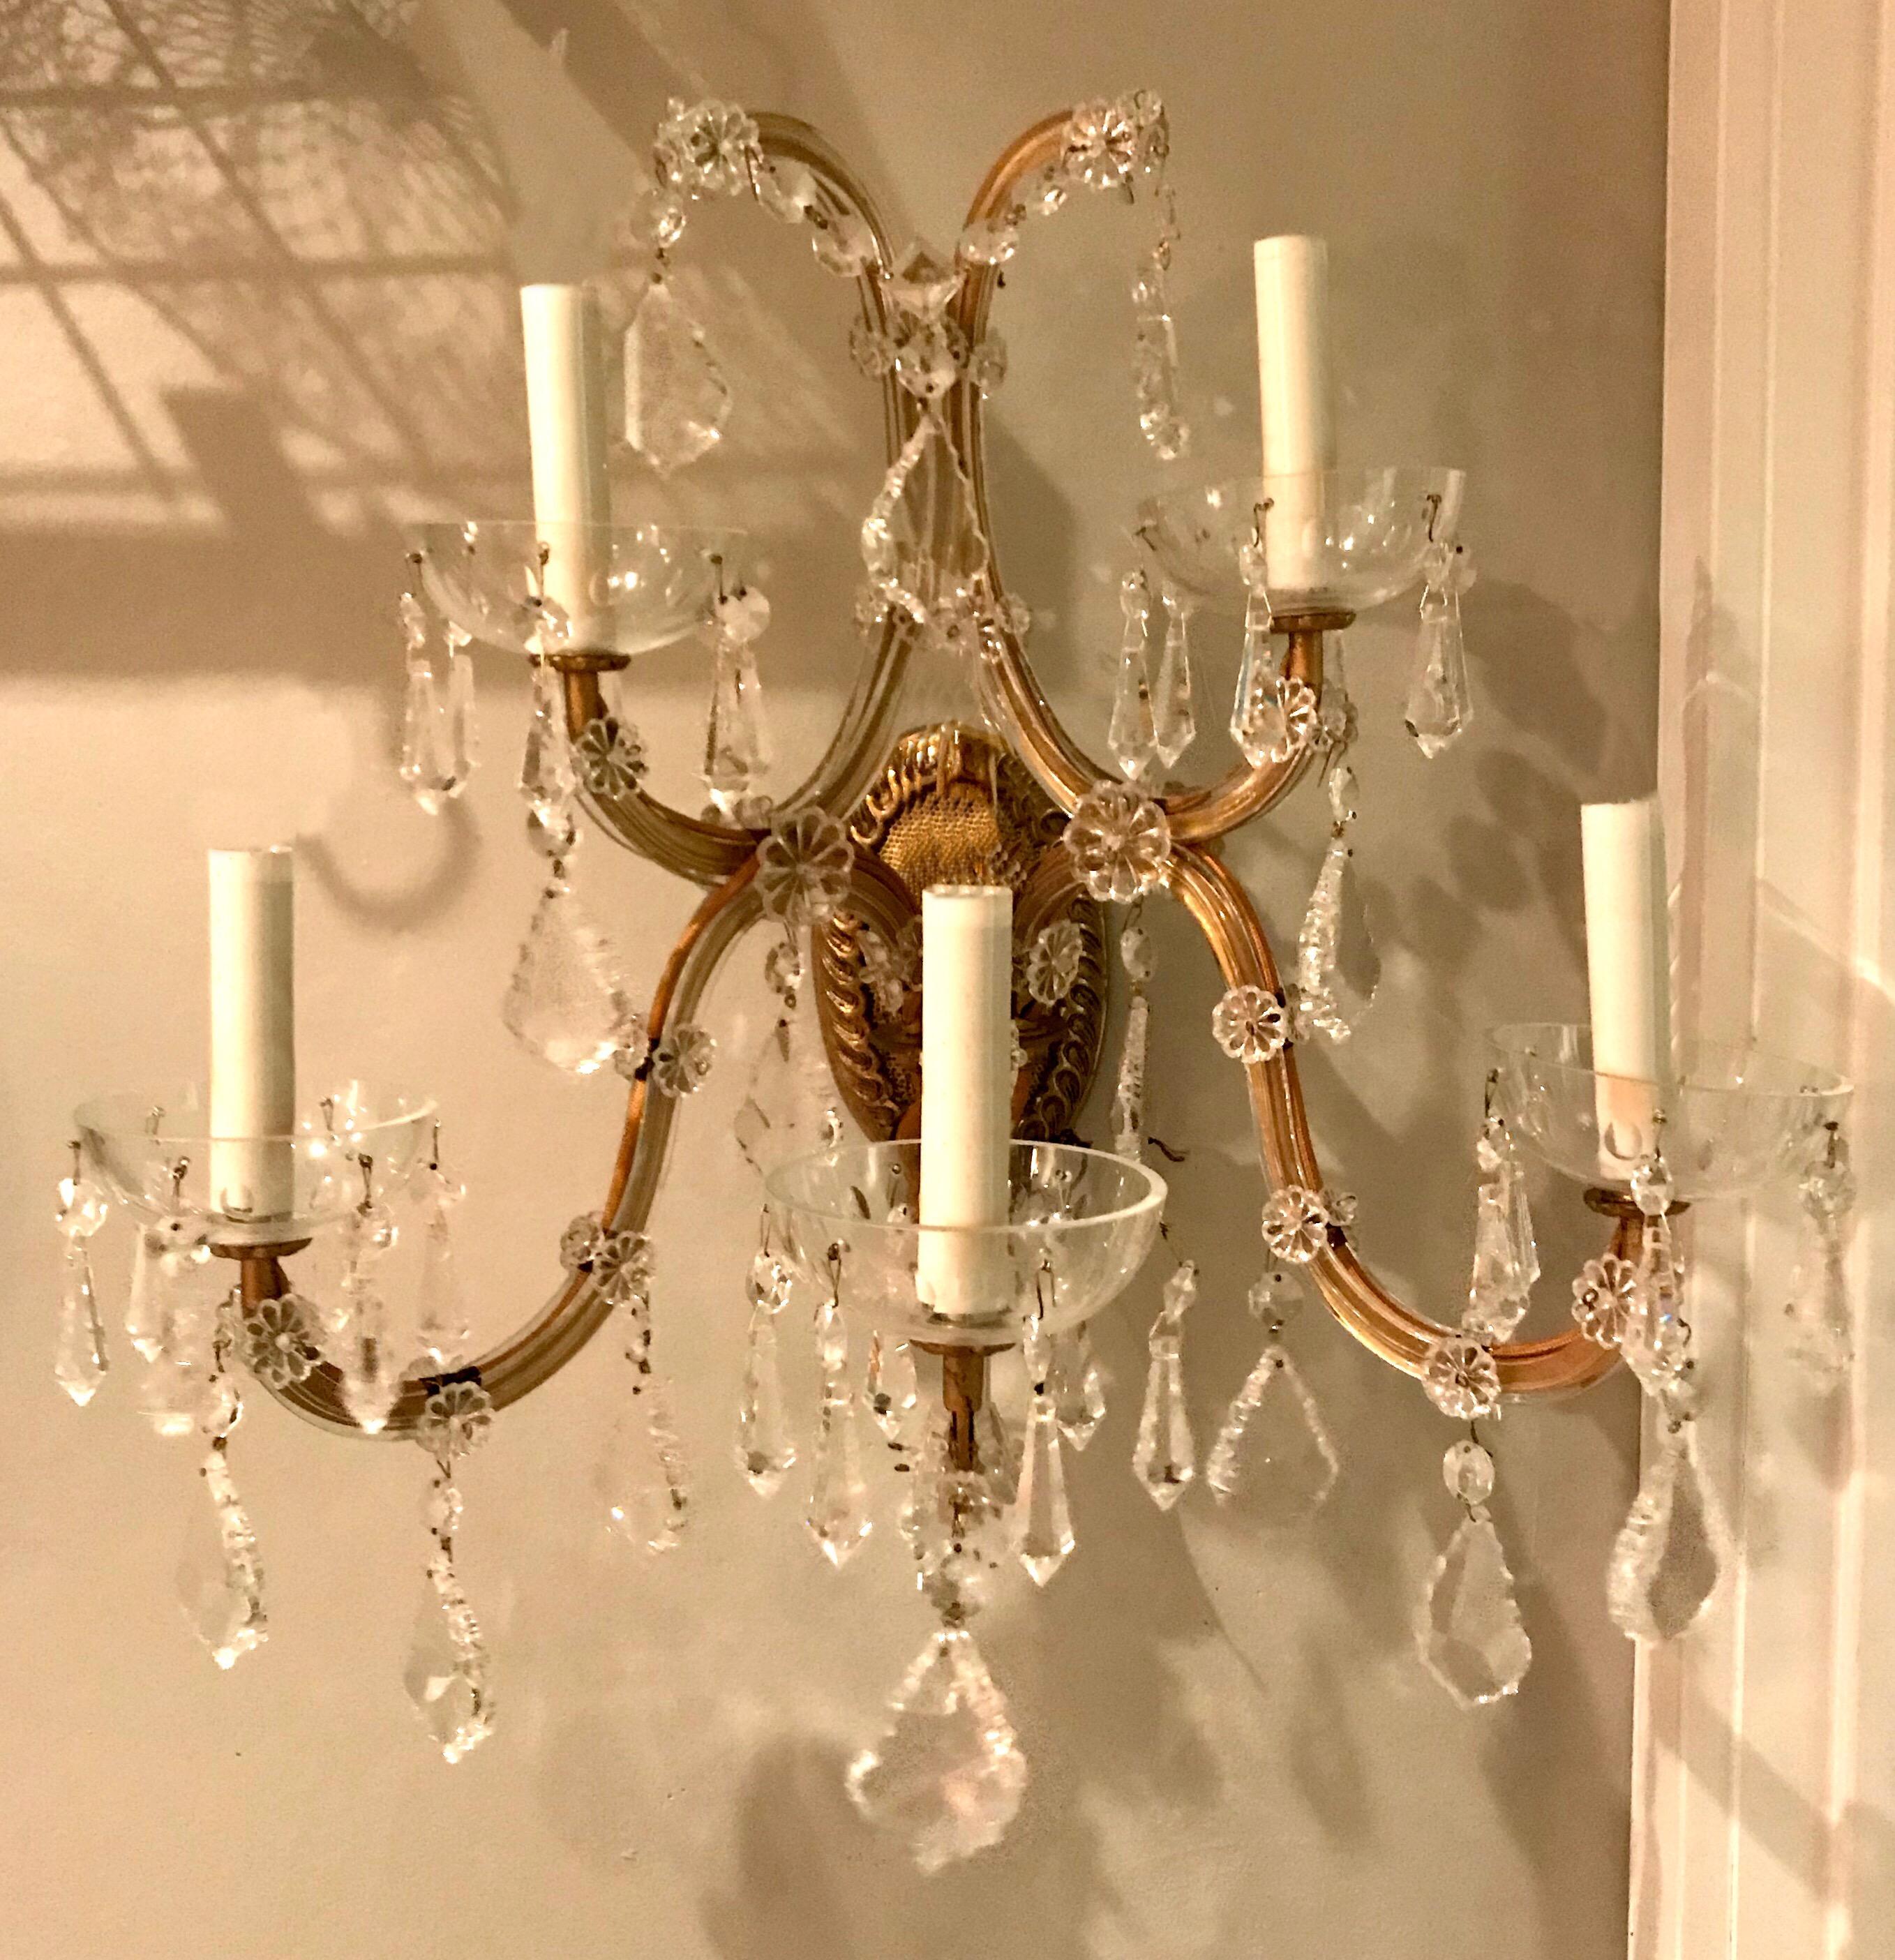 Pair of Vintage Italian Gilt Metal and Crystal Sconces In Excellent Condition For Sale In Stockton, NJ